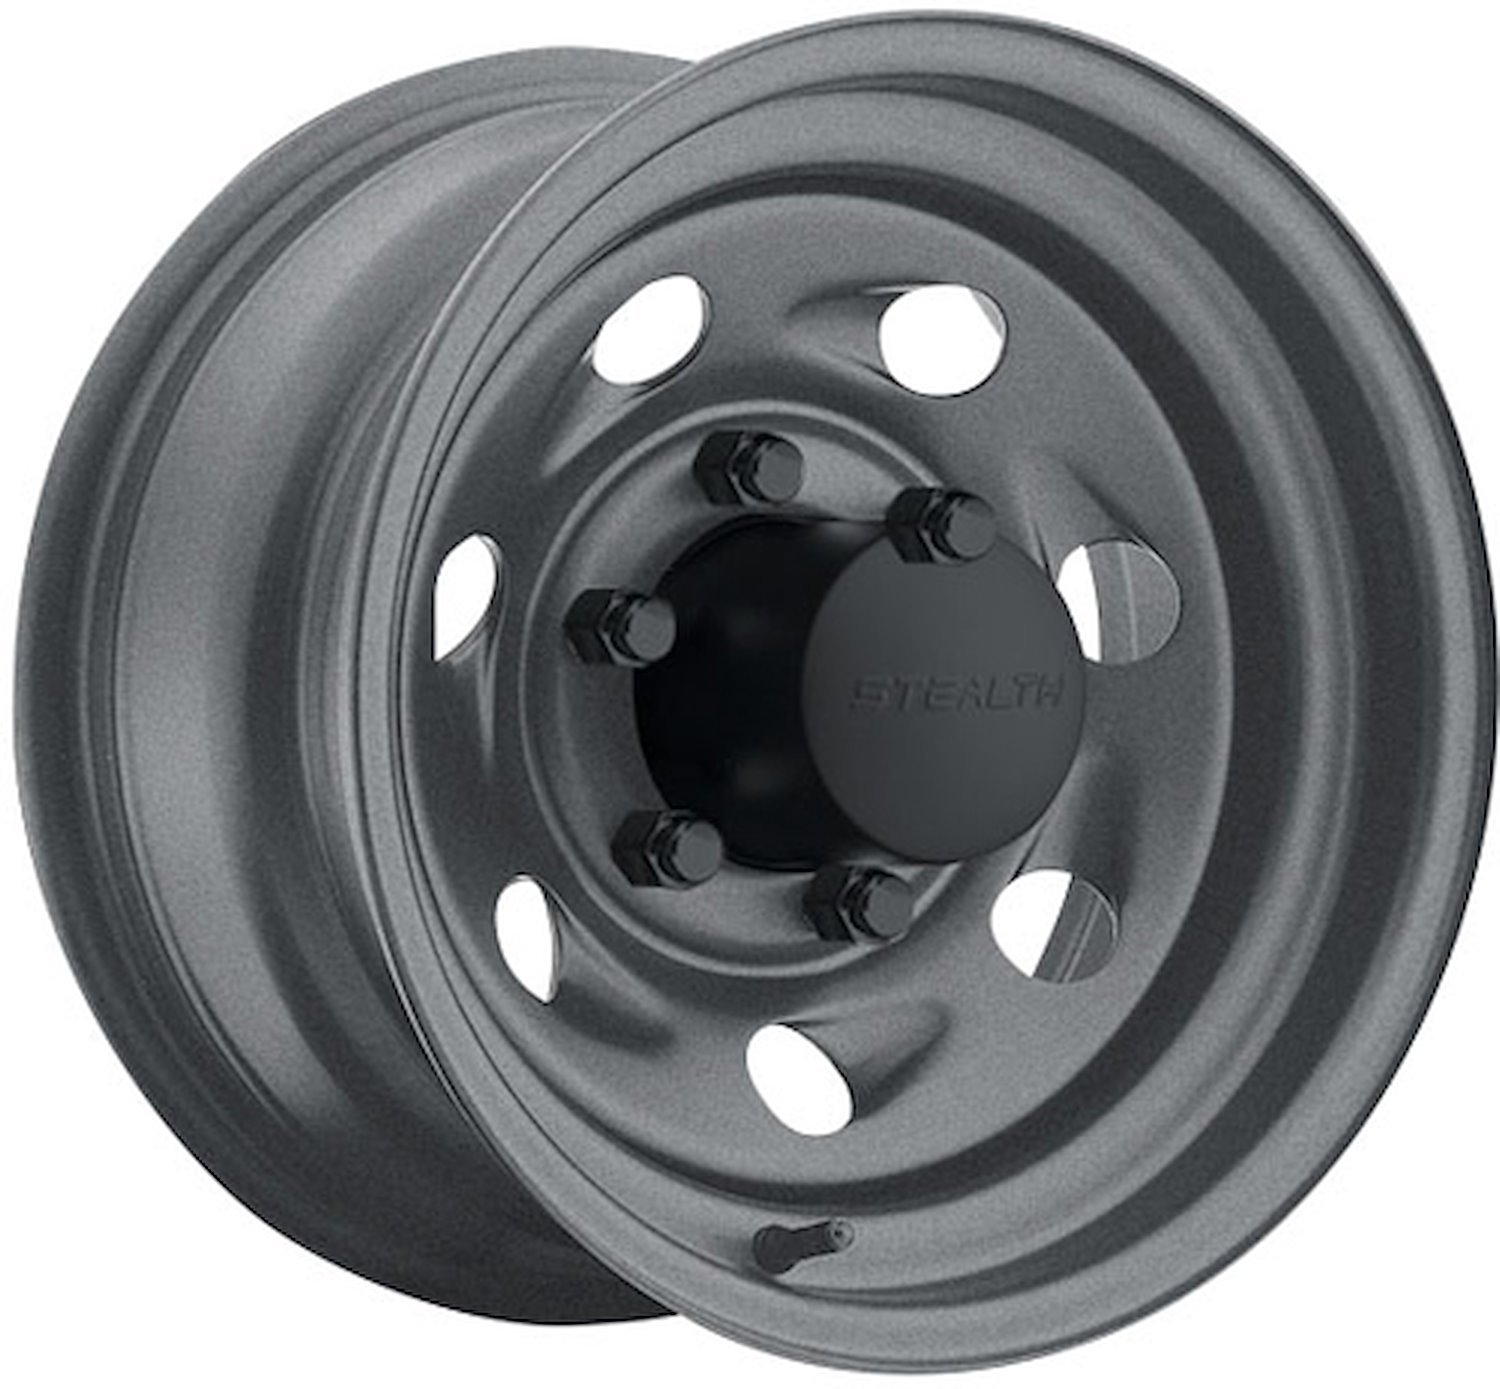 STEALTH GUNMETAL VORTEC 15 x 7 6 x 55 Bolt Circle 4 Back Spacing 0 offset 428 Center Bore 1600 lbs Load Rating